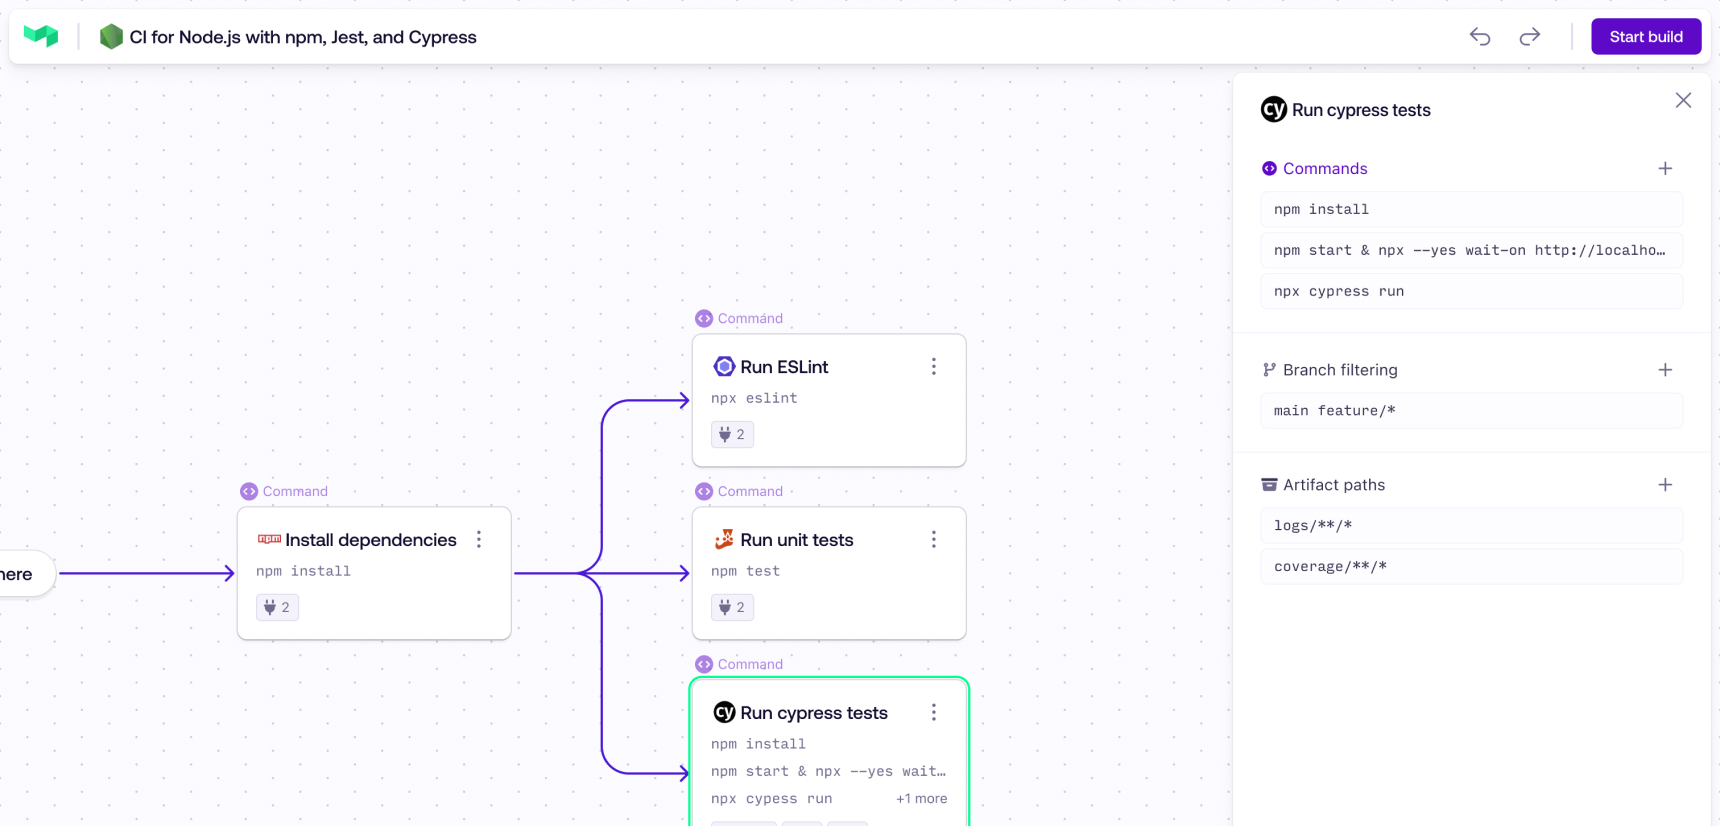 Understand and interact with your pipeline configuration, visually.